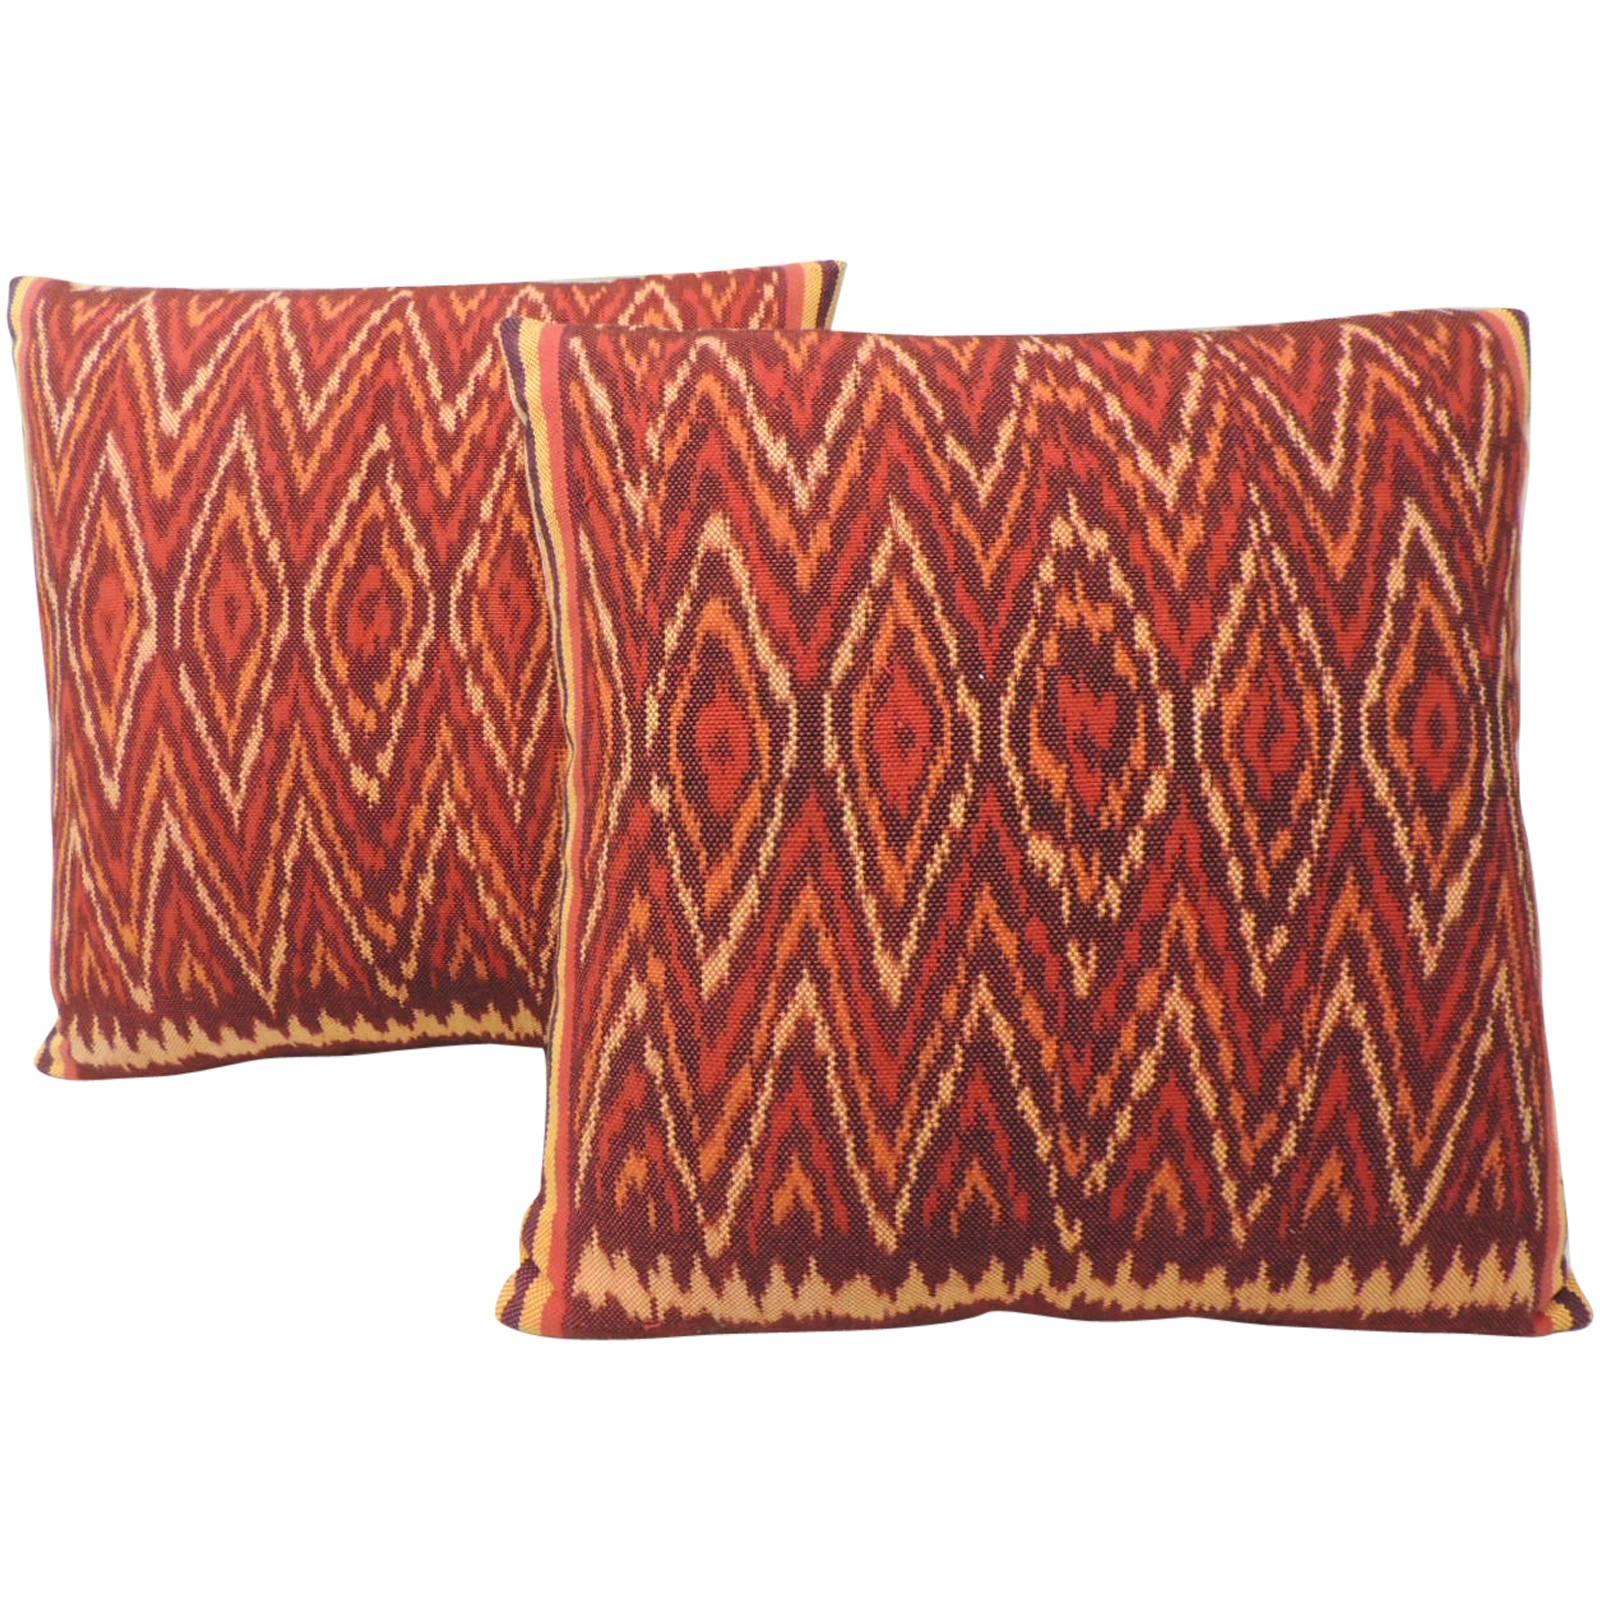 Pair of Red and Orange Vintage Ikat Woven Pillows